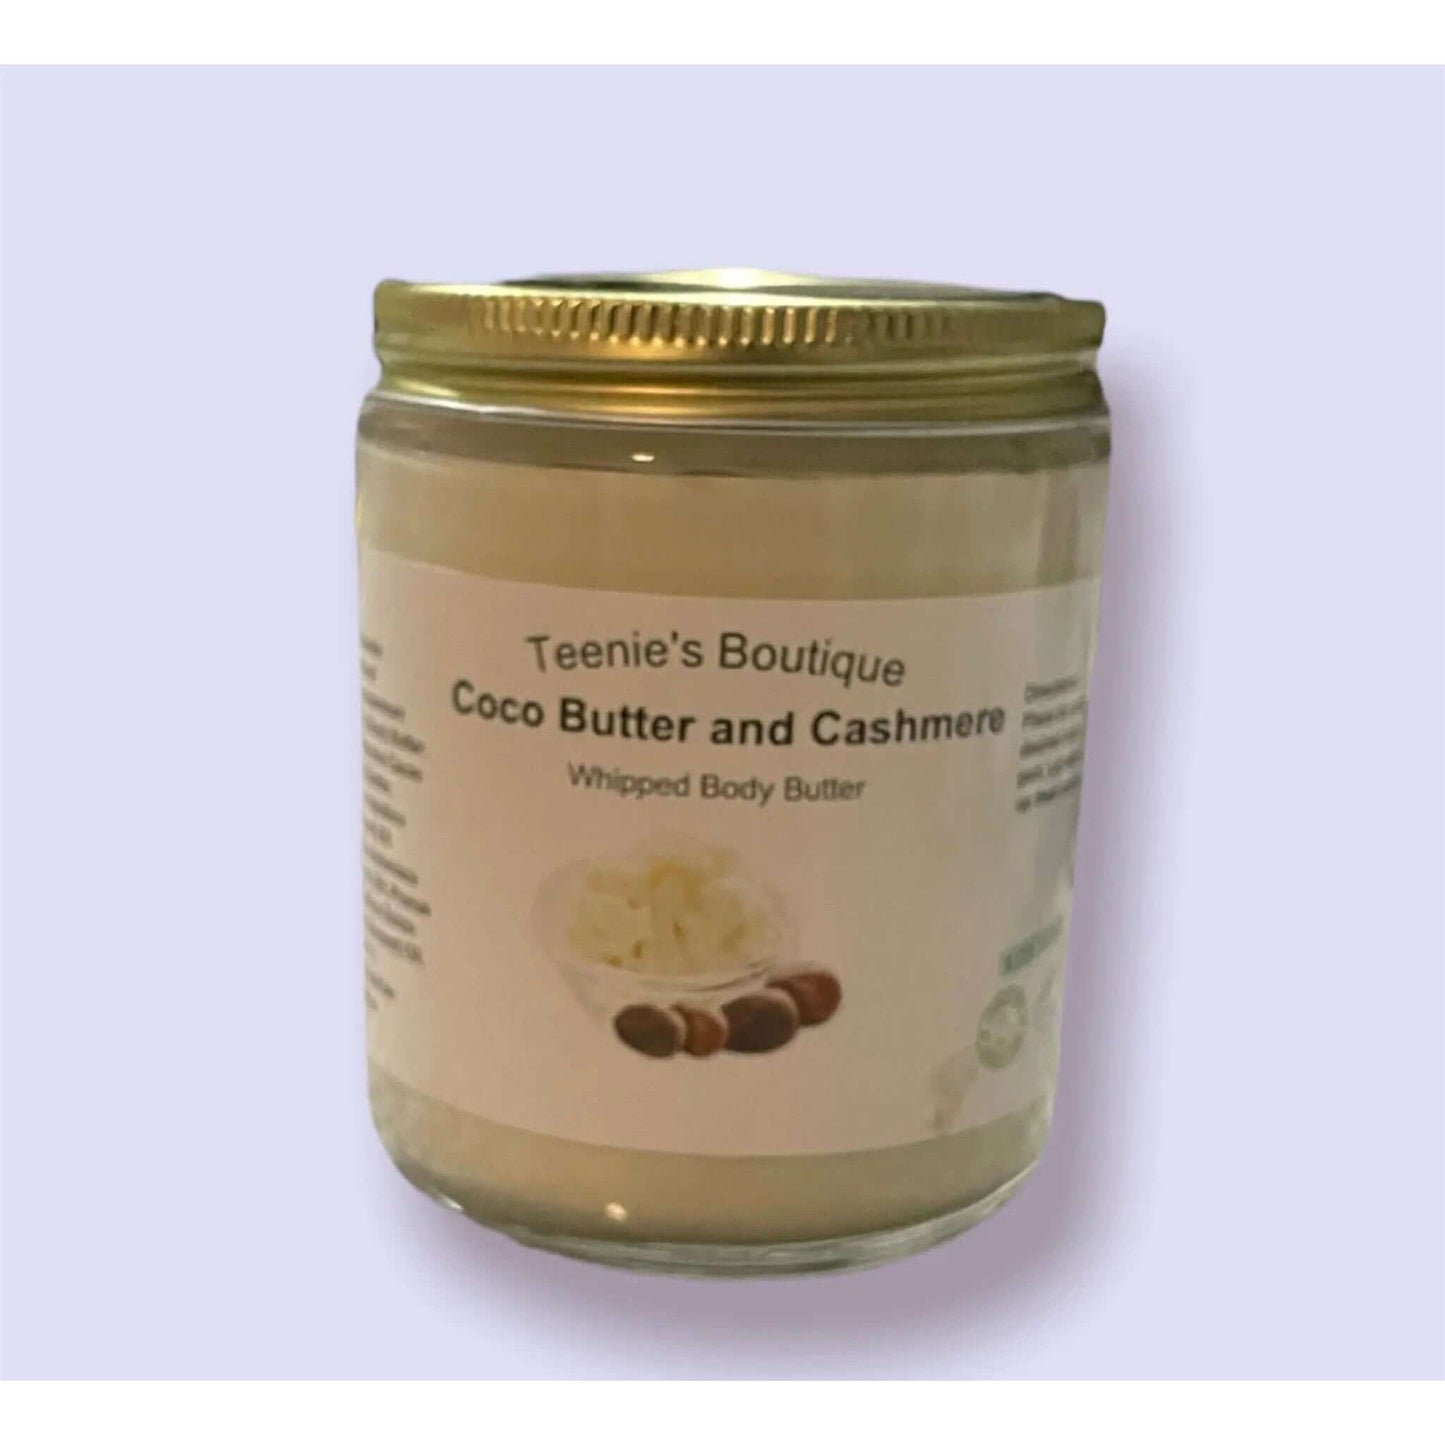 Luxurious Body Butter - Teenies Boutique Coco Butter and Cashmere Body Butter